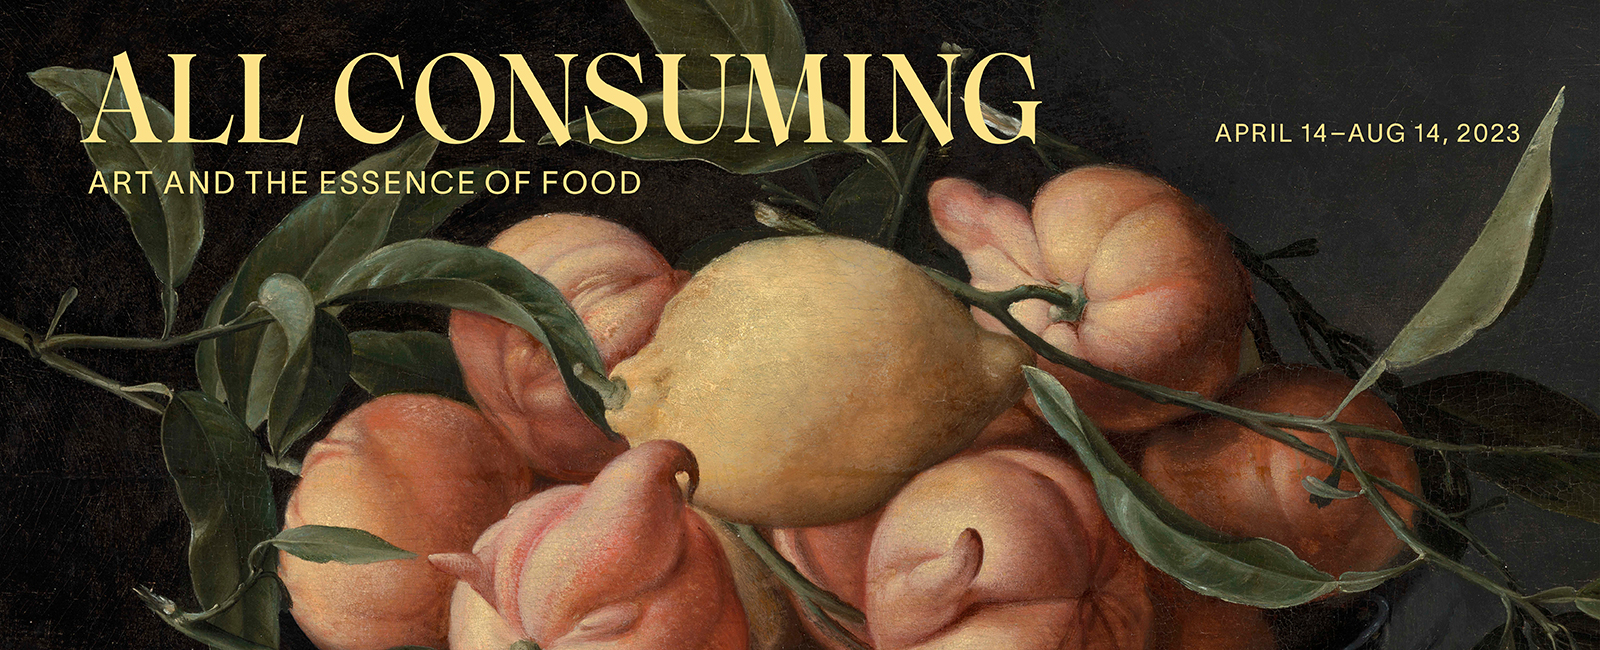 All Consuming: Art and the Essence of Food